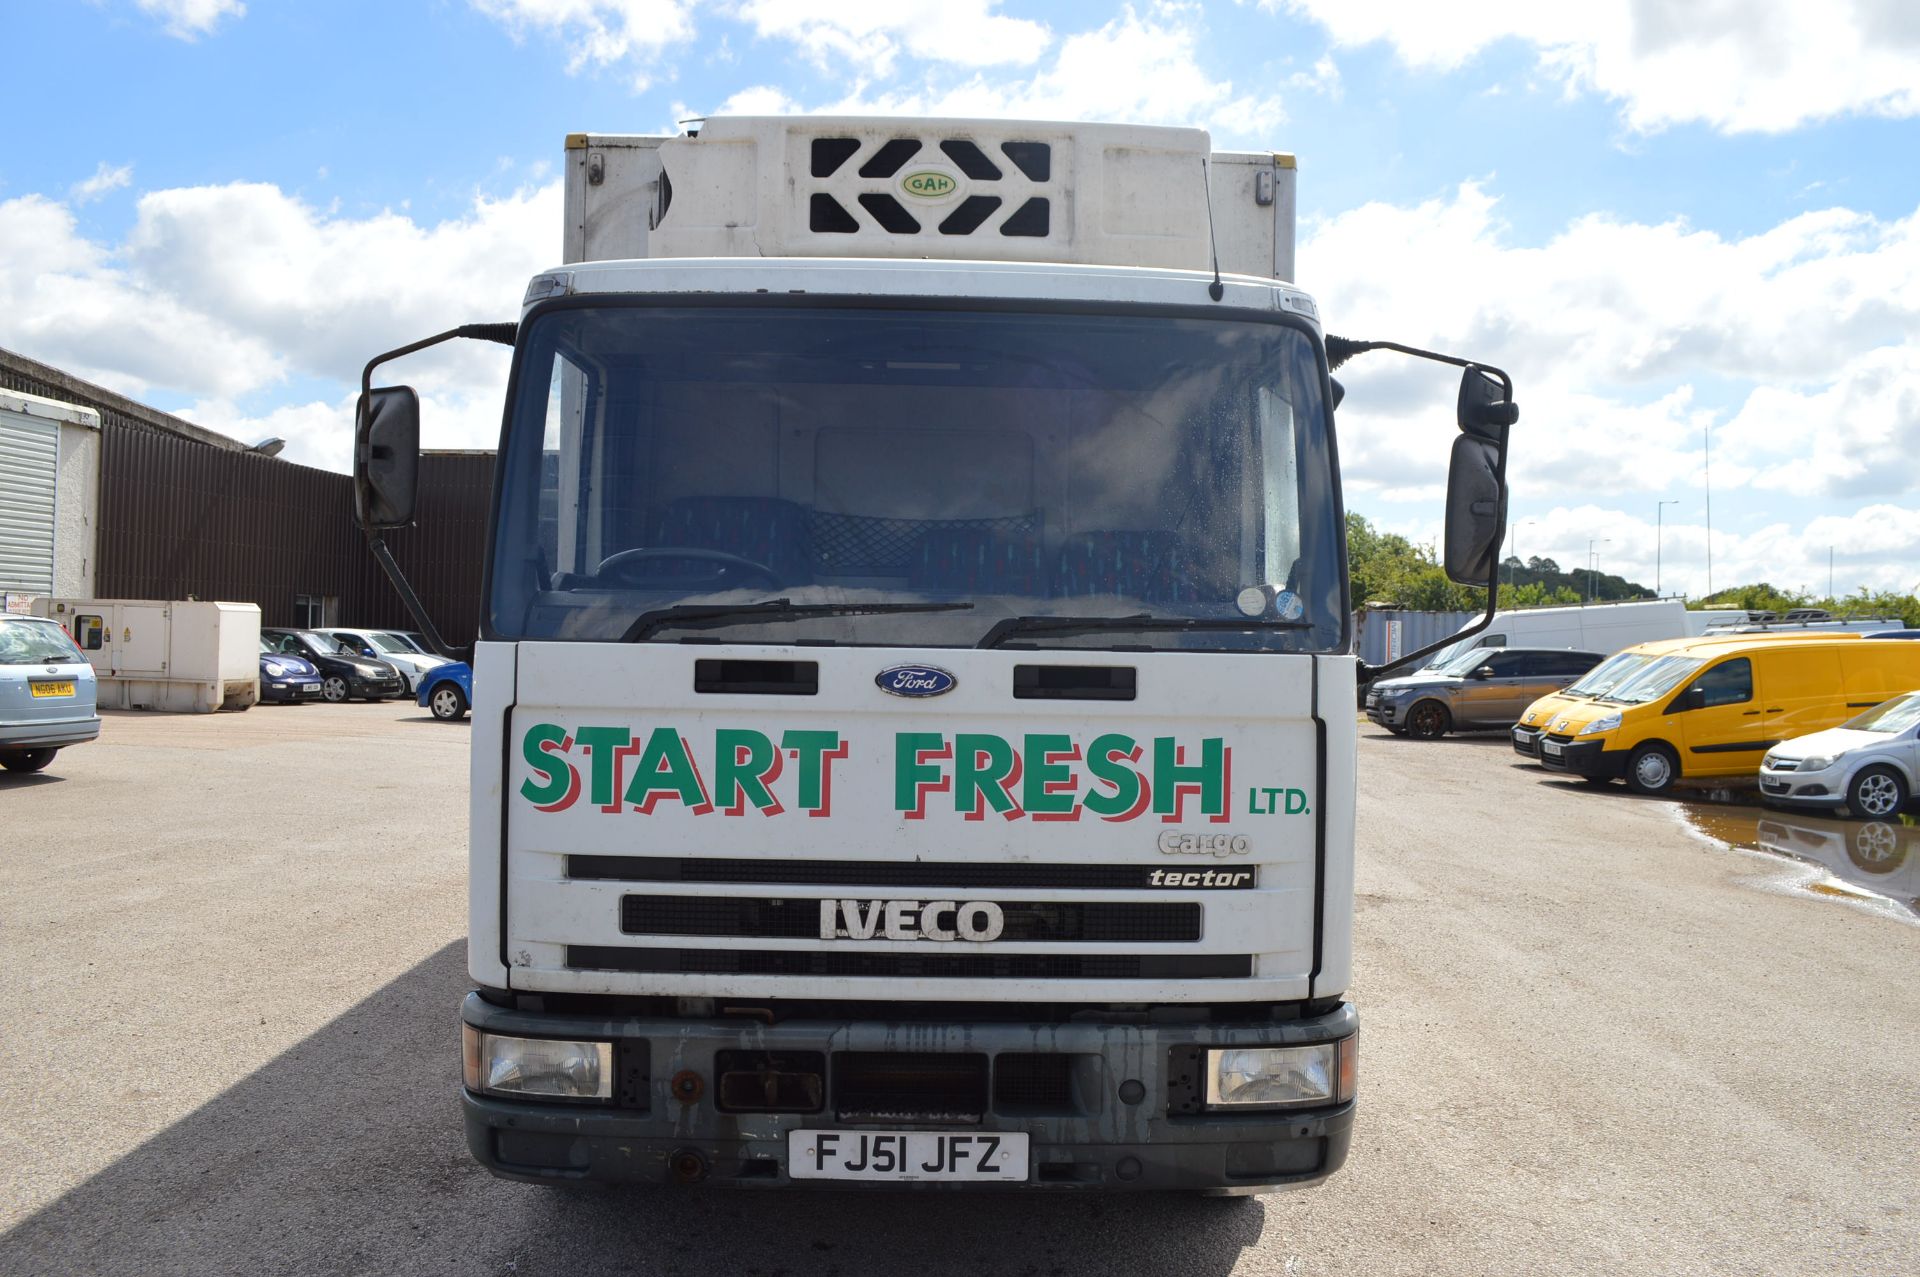 2001/51 REG IVECO-FORD CARGO TECTOR 75E17 REFRIGERATED LORRY - Image 2 of 19